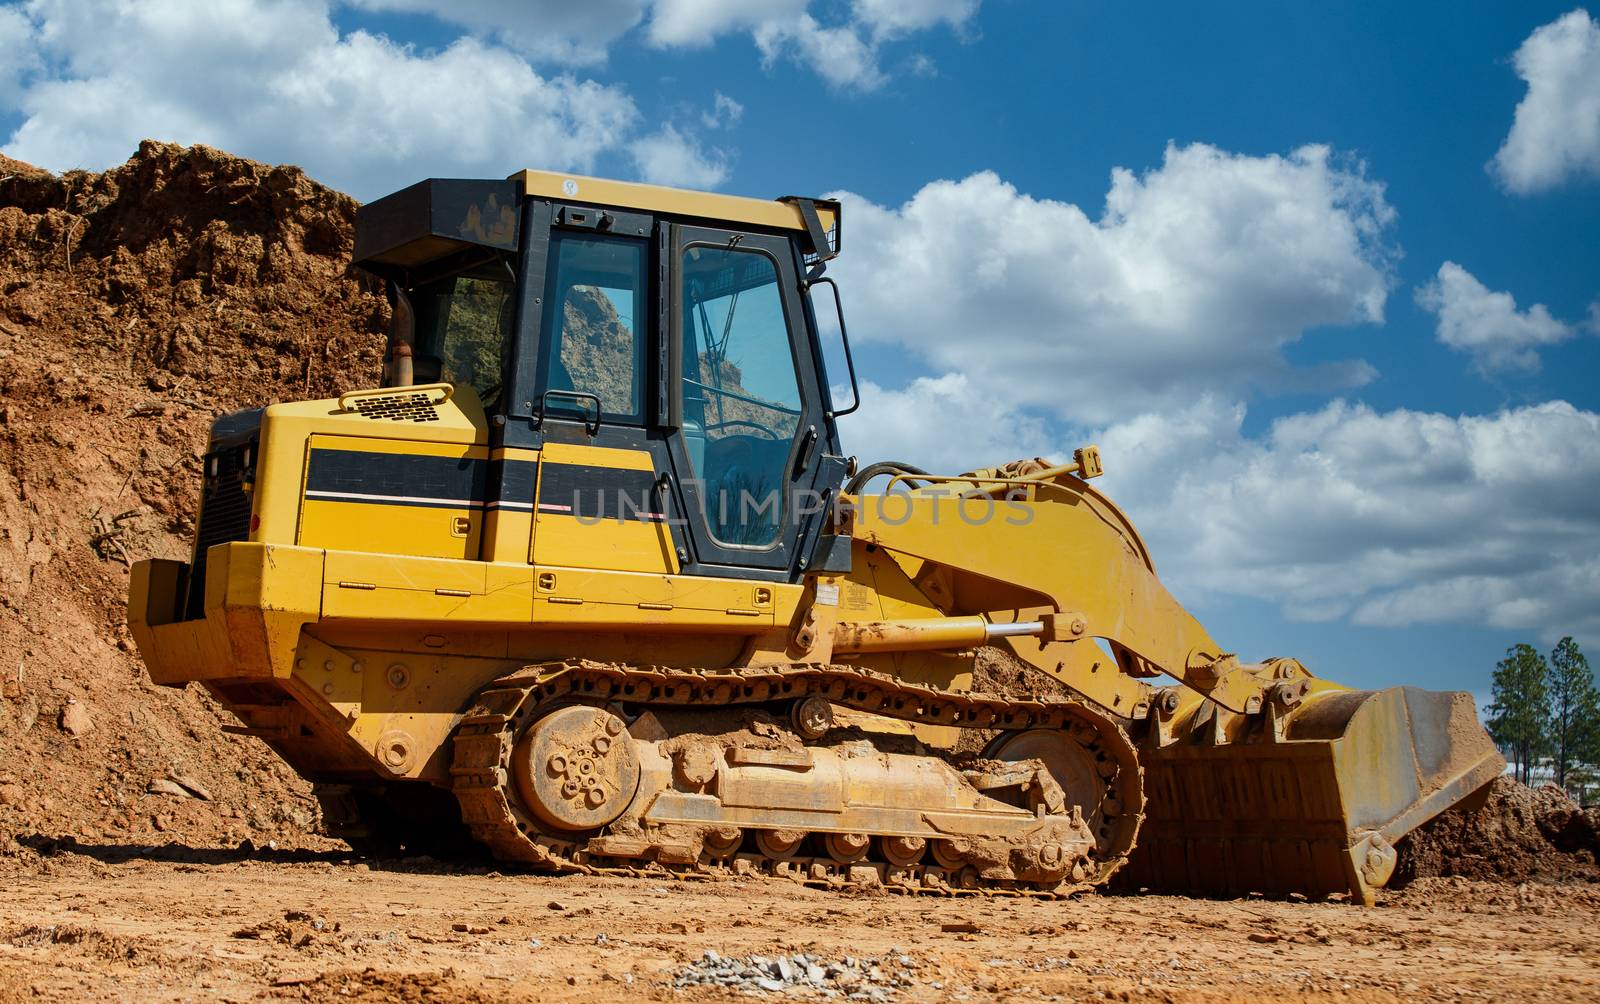 A large, yellow, industrial earth mover by a pile of dirt on a construction site